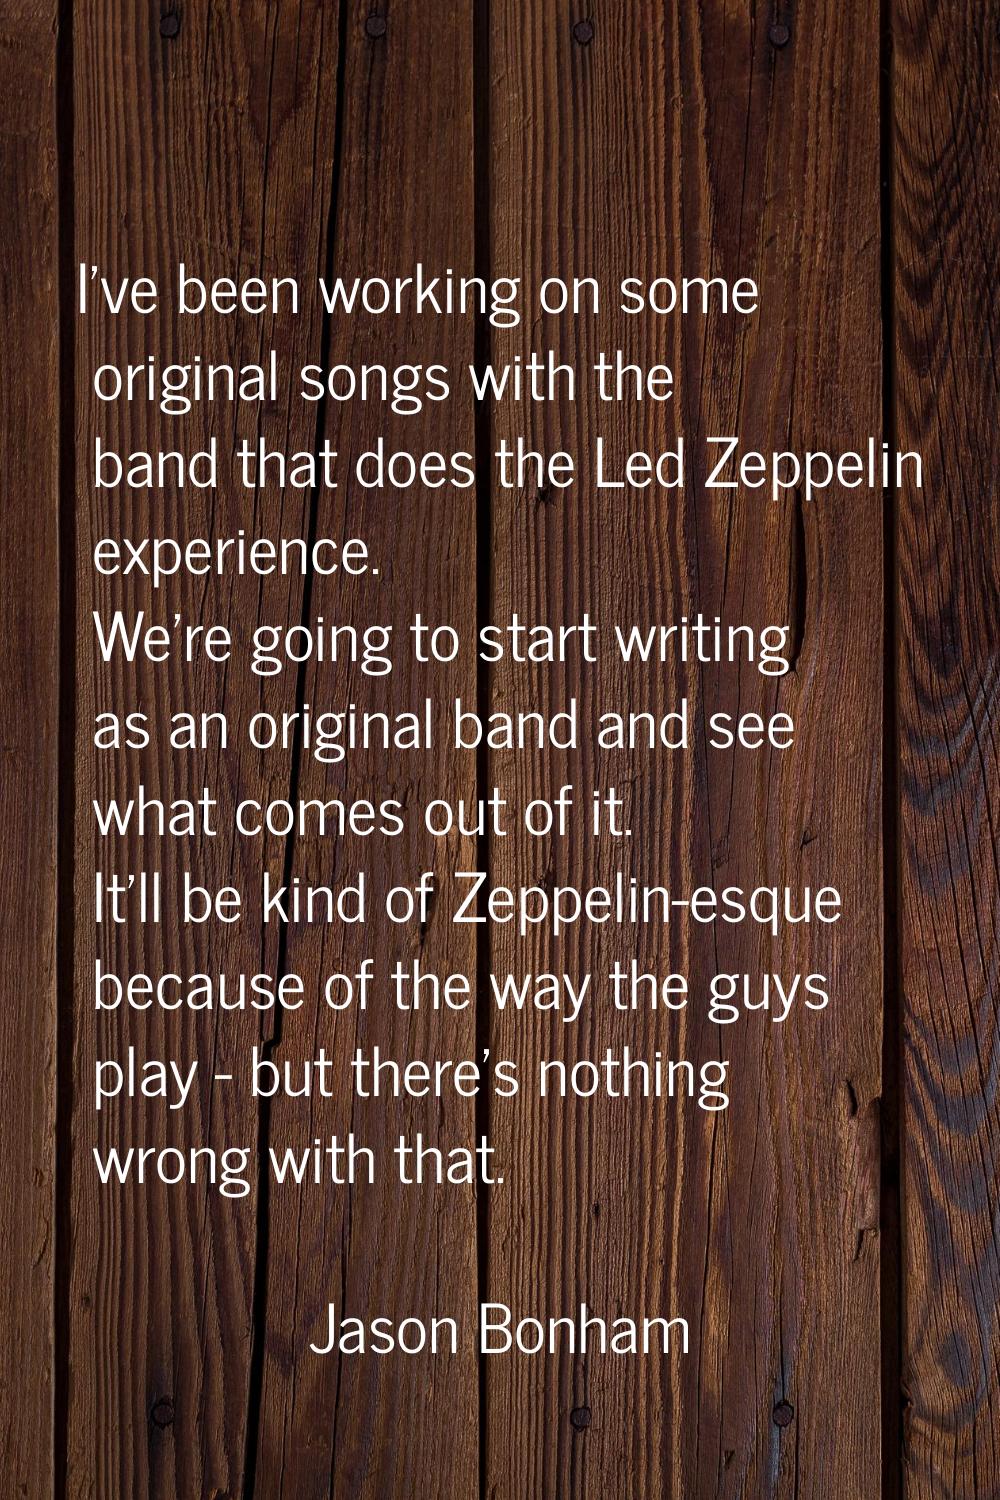 I've been working on some original songs with the band that does the Led Zeppelin experience. We're